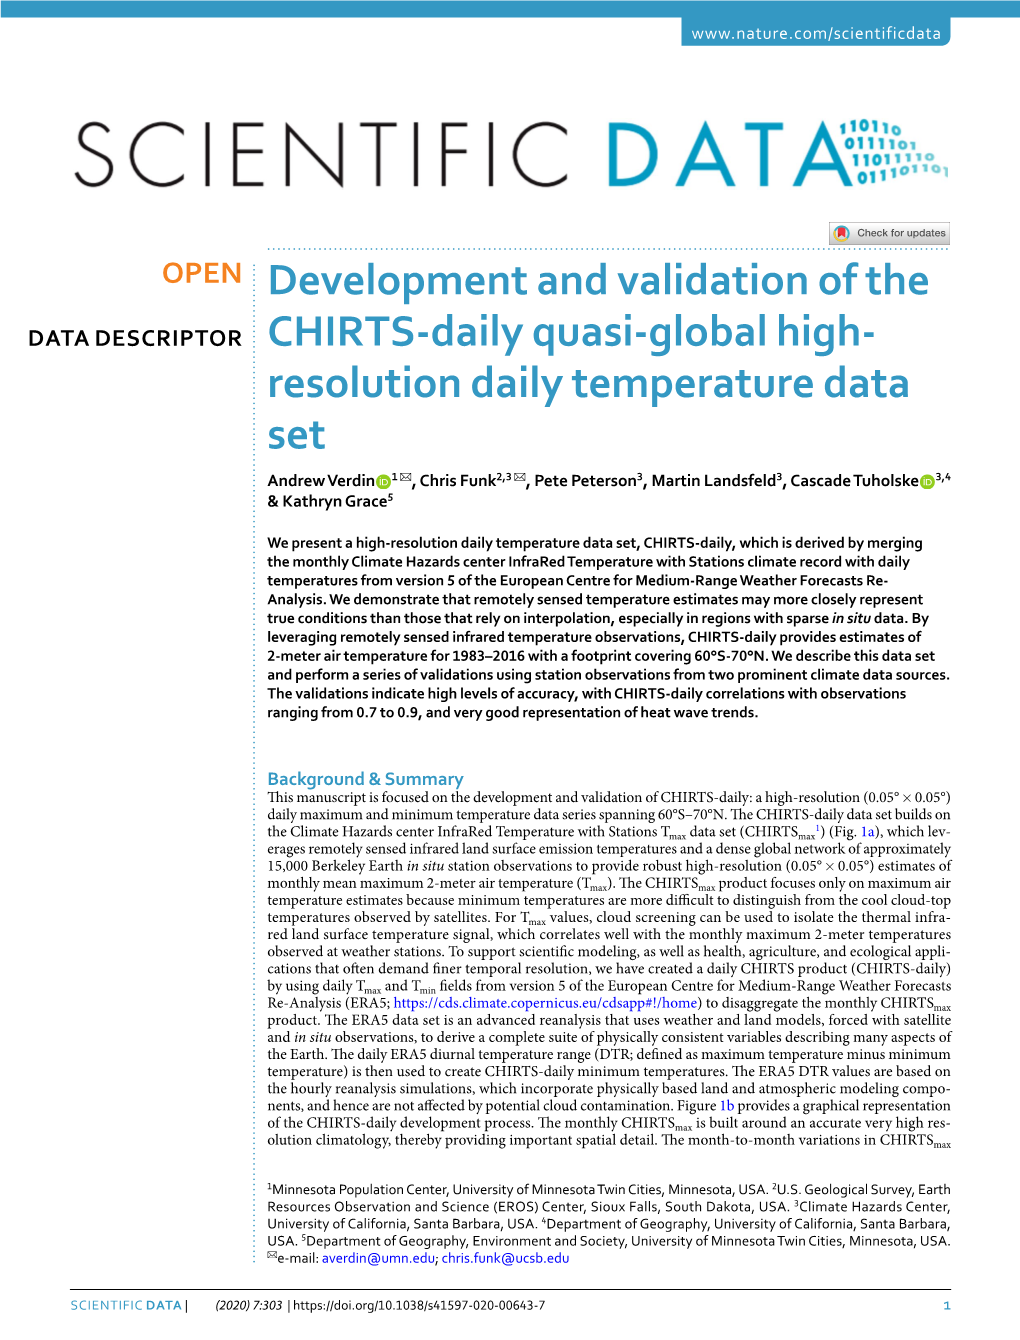 Development and Validation of the CHIRTS-Daily Quasi-Global High